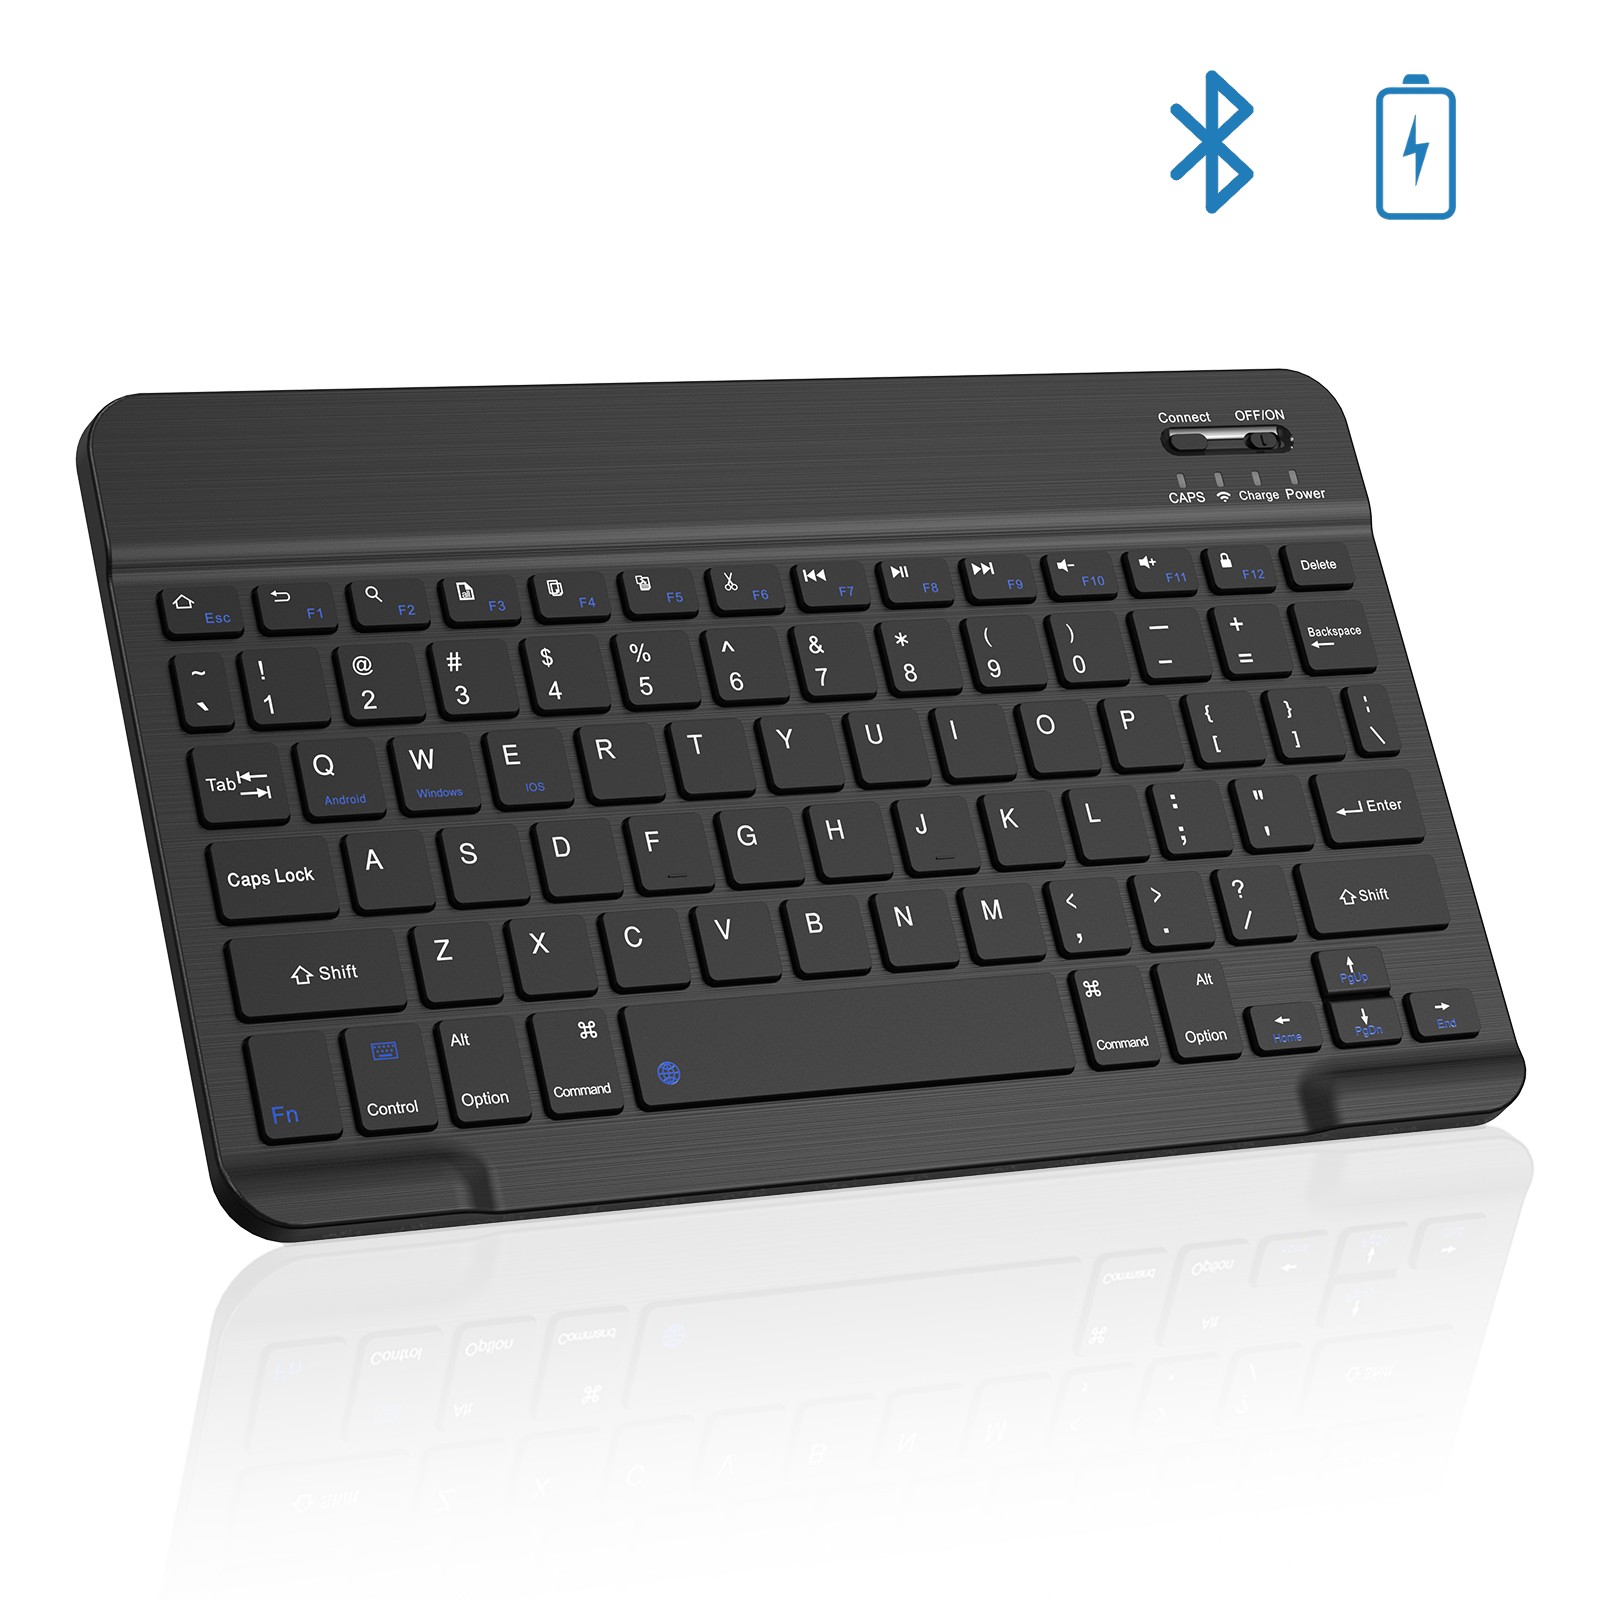 Cimetech Bluetooth Keyboard, Ultra-Slim Wireless Keyboard Quiet Portable Design with Built-in Rechargeable Battery for IOS, Mac, iPad, Windows and Android 3.0 and Above OS Black - image 1 of 8